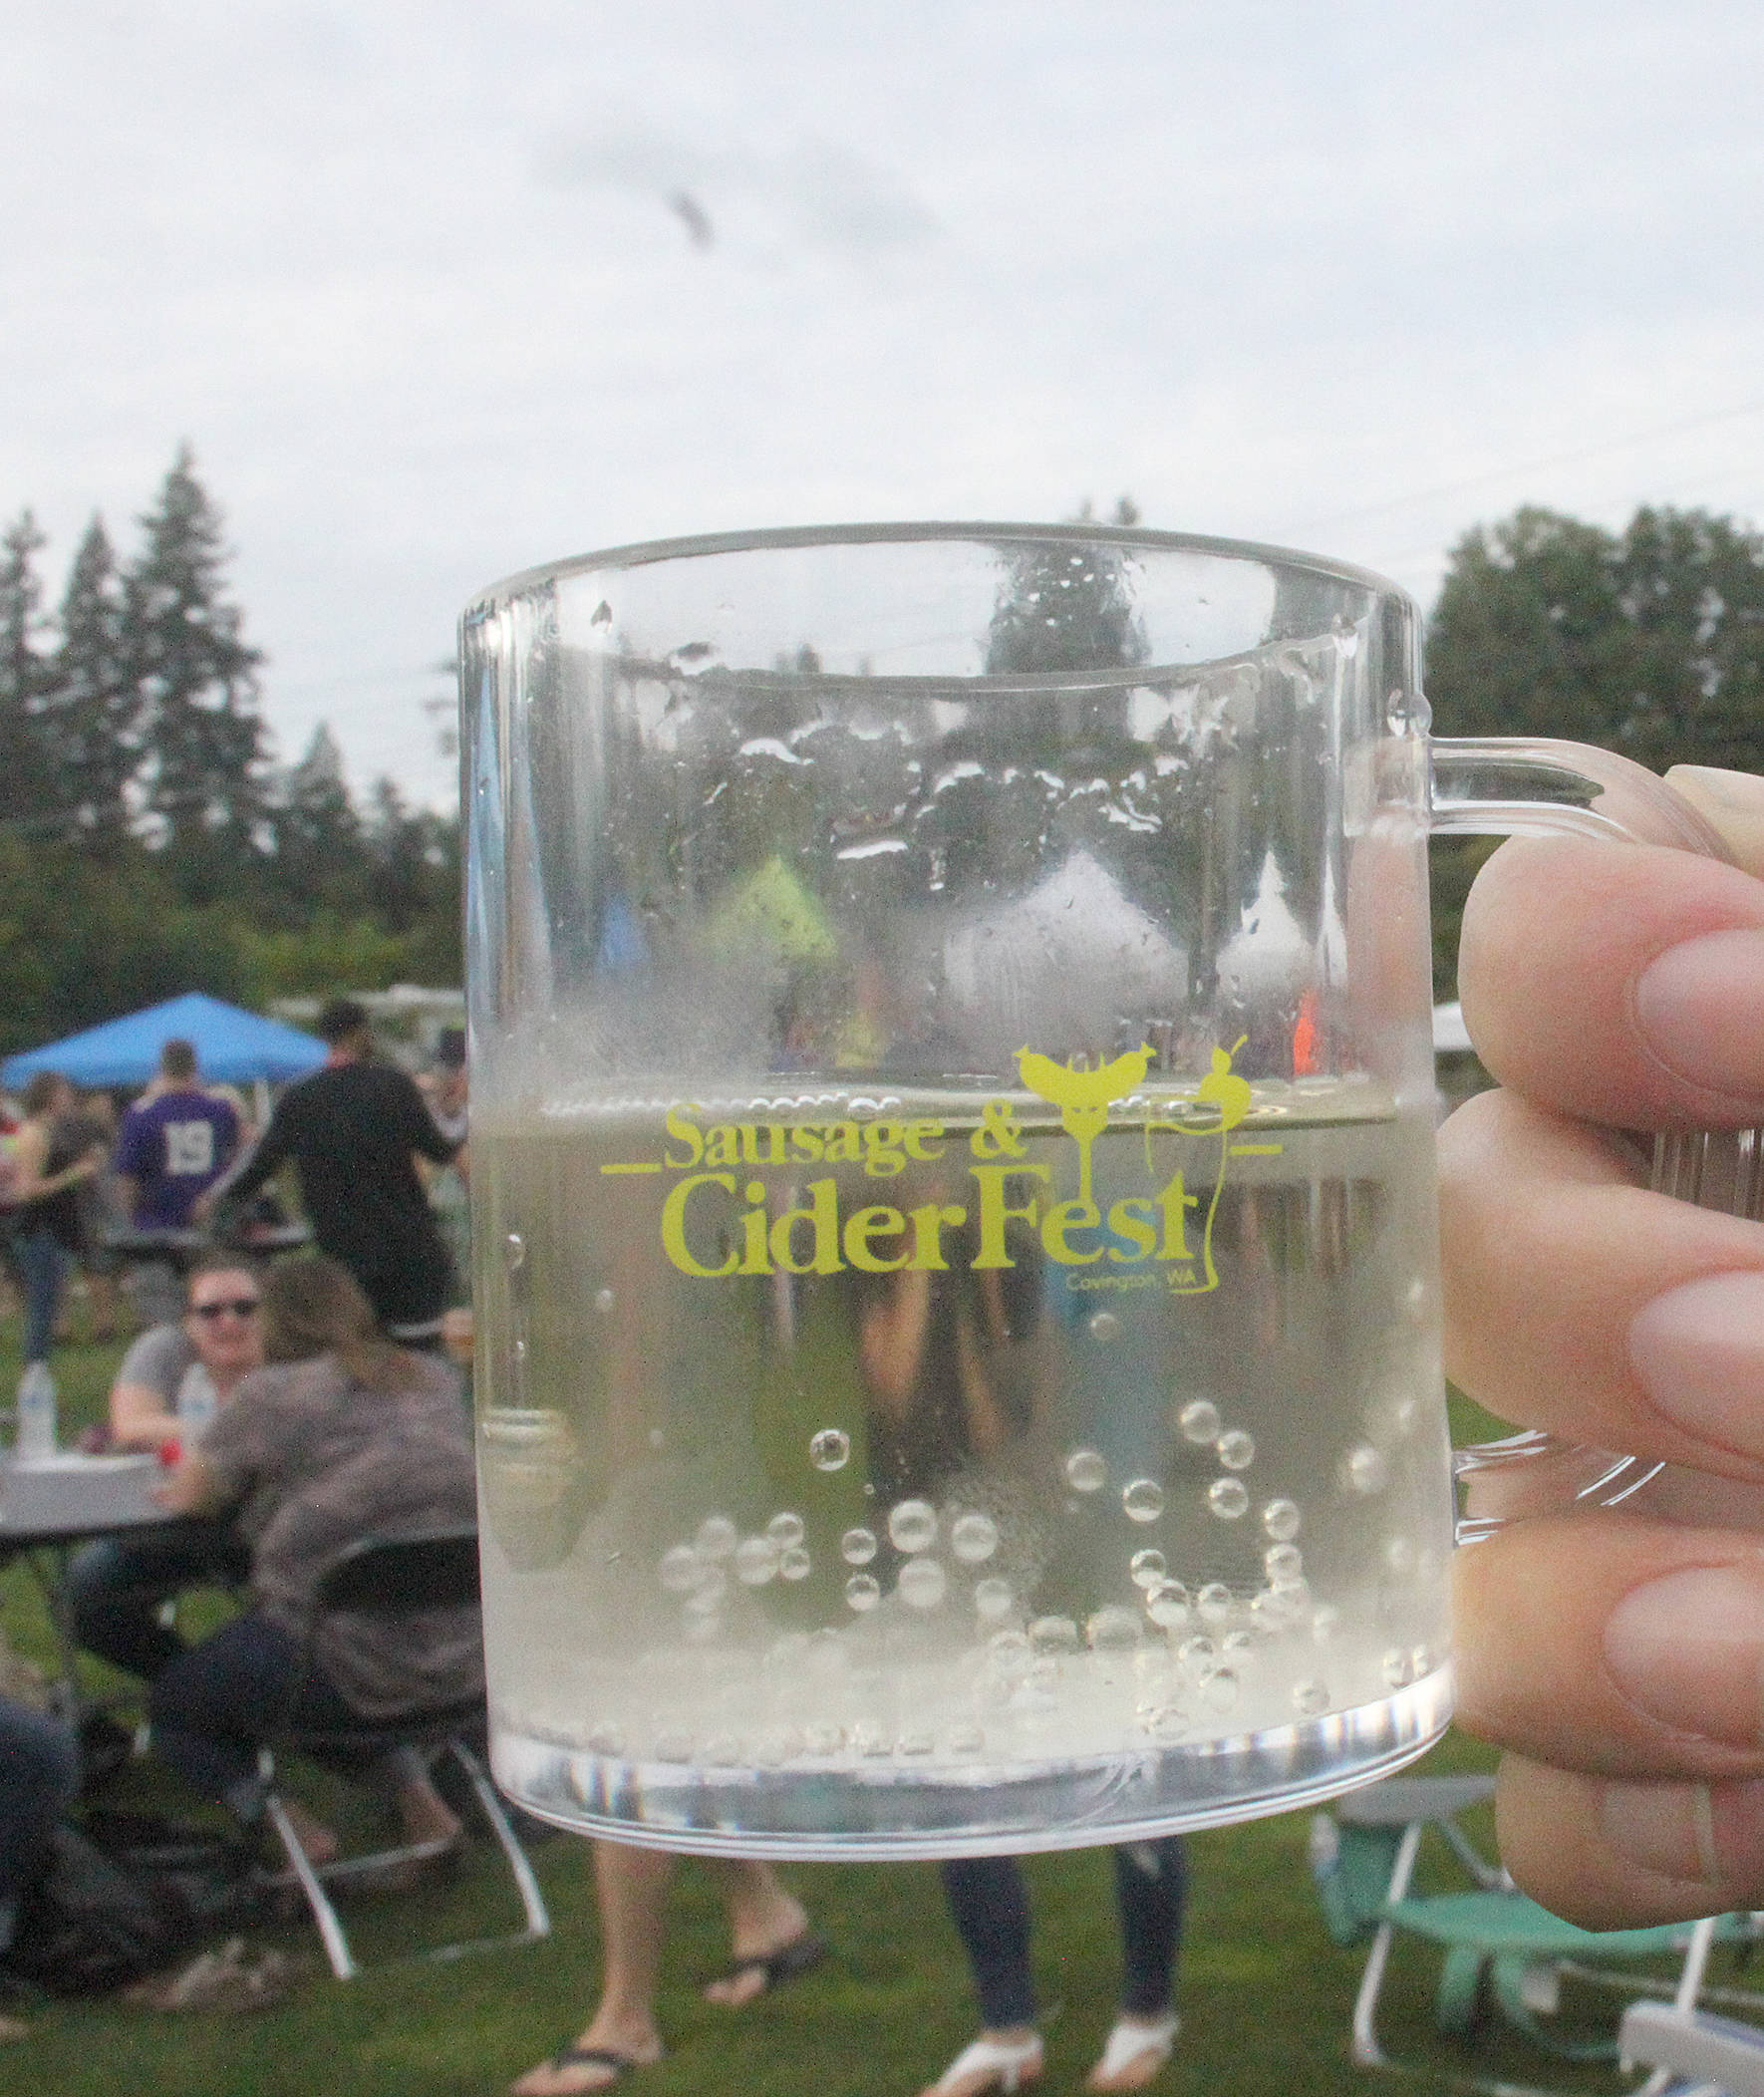 Plastic, 4 ounce mugs were given to attendants to sample multiple local ciders at the 2019 Sausage and Cider Fest.